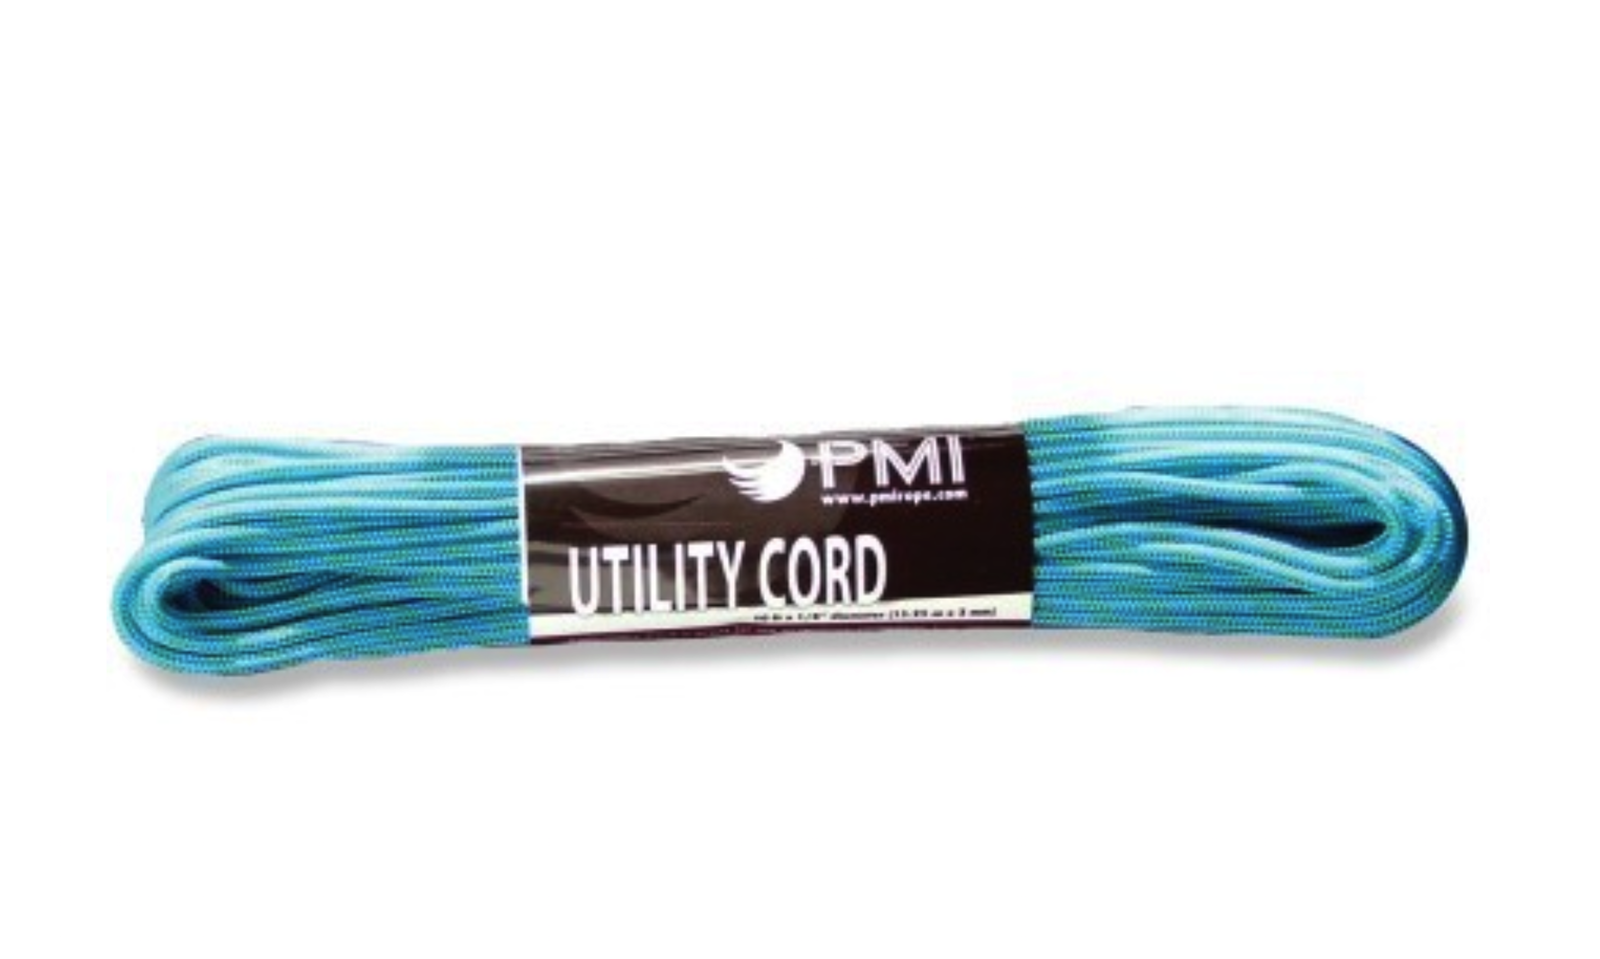 summer backpacking gear - utility cord